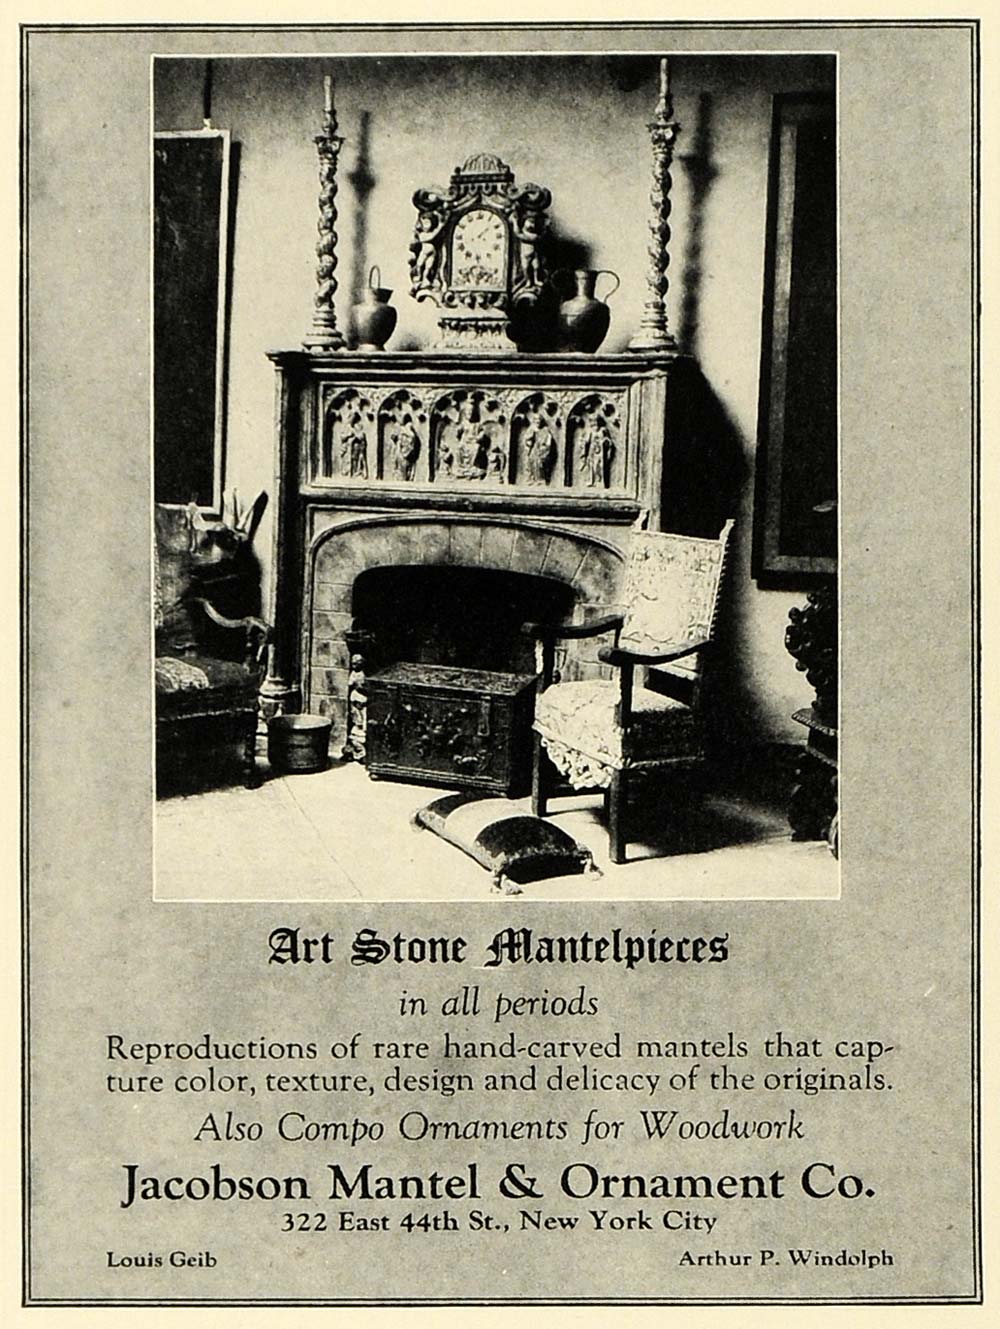 1928 Ad Jacobson Mantel Ornament Co Art Stone Mantelpieces Carved Designs HB2